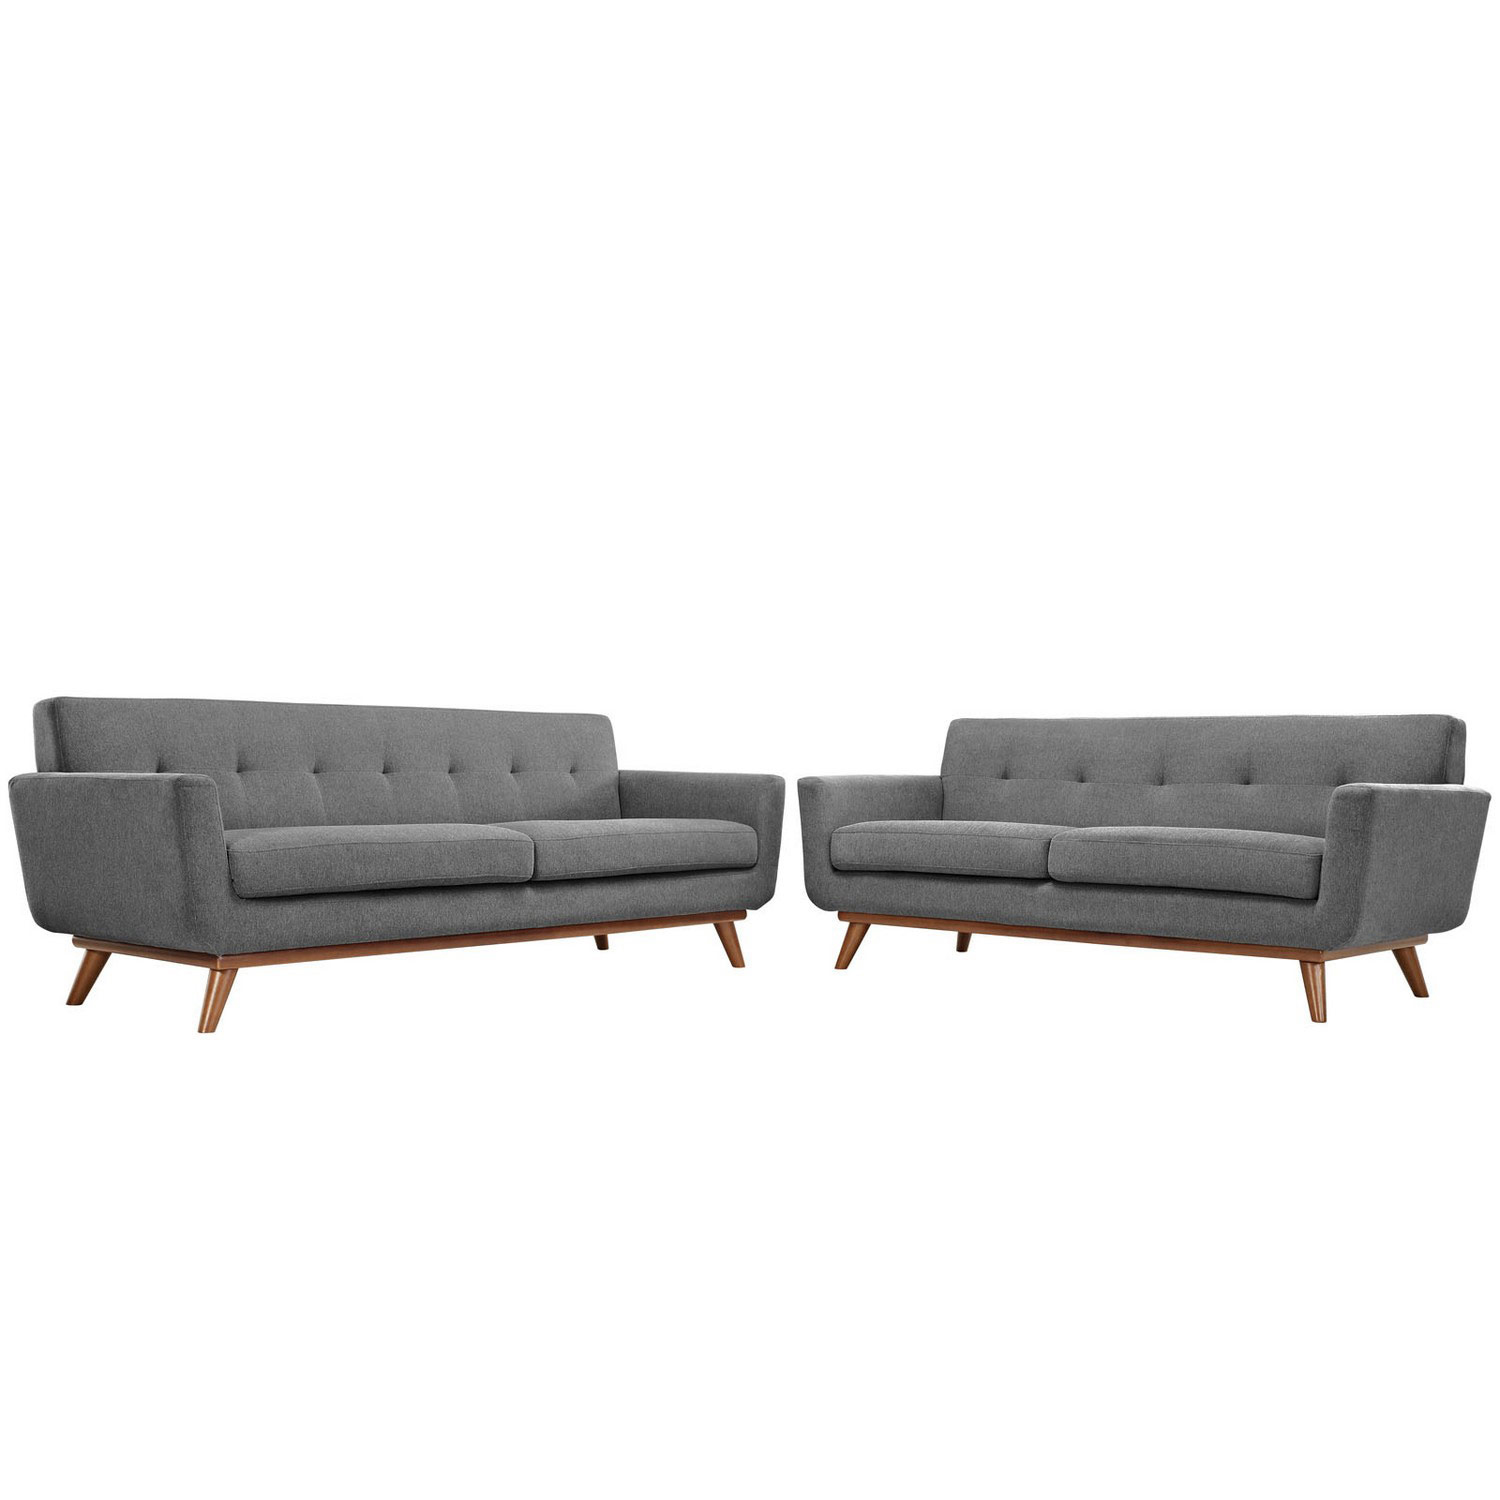 Modway Engage Loveseat and Sofa Set of 2 - Gray